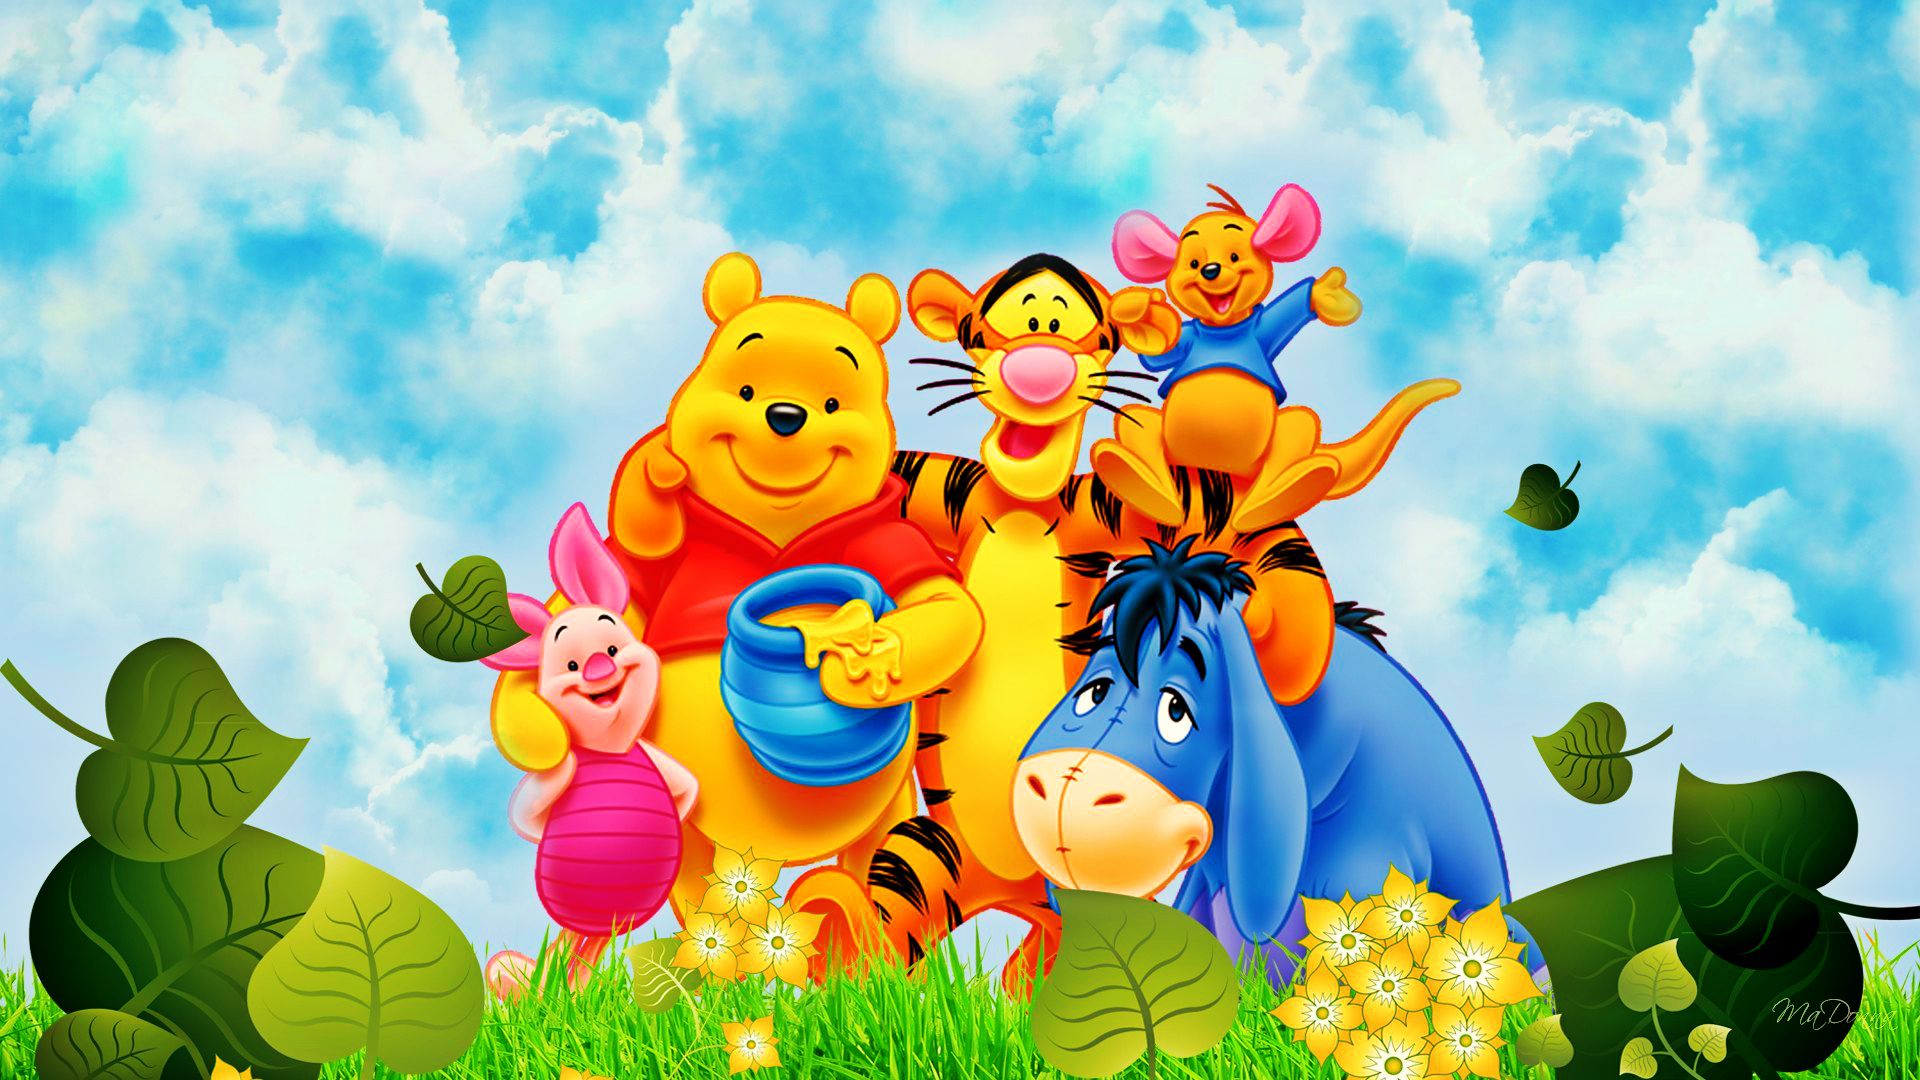 To download click on Winnie the Pooh Friendship Day Wallpaper then